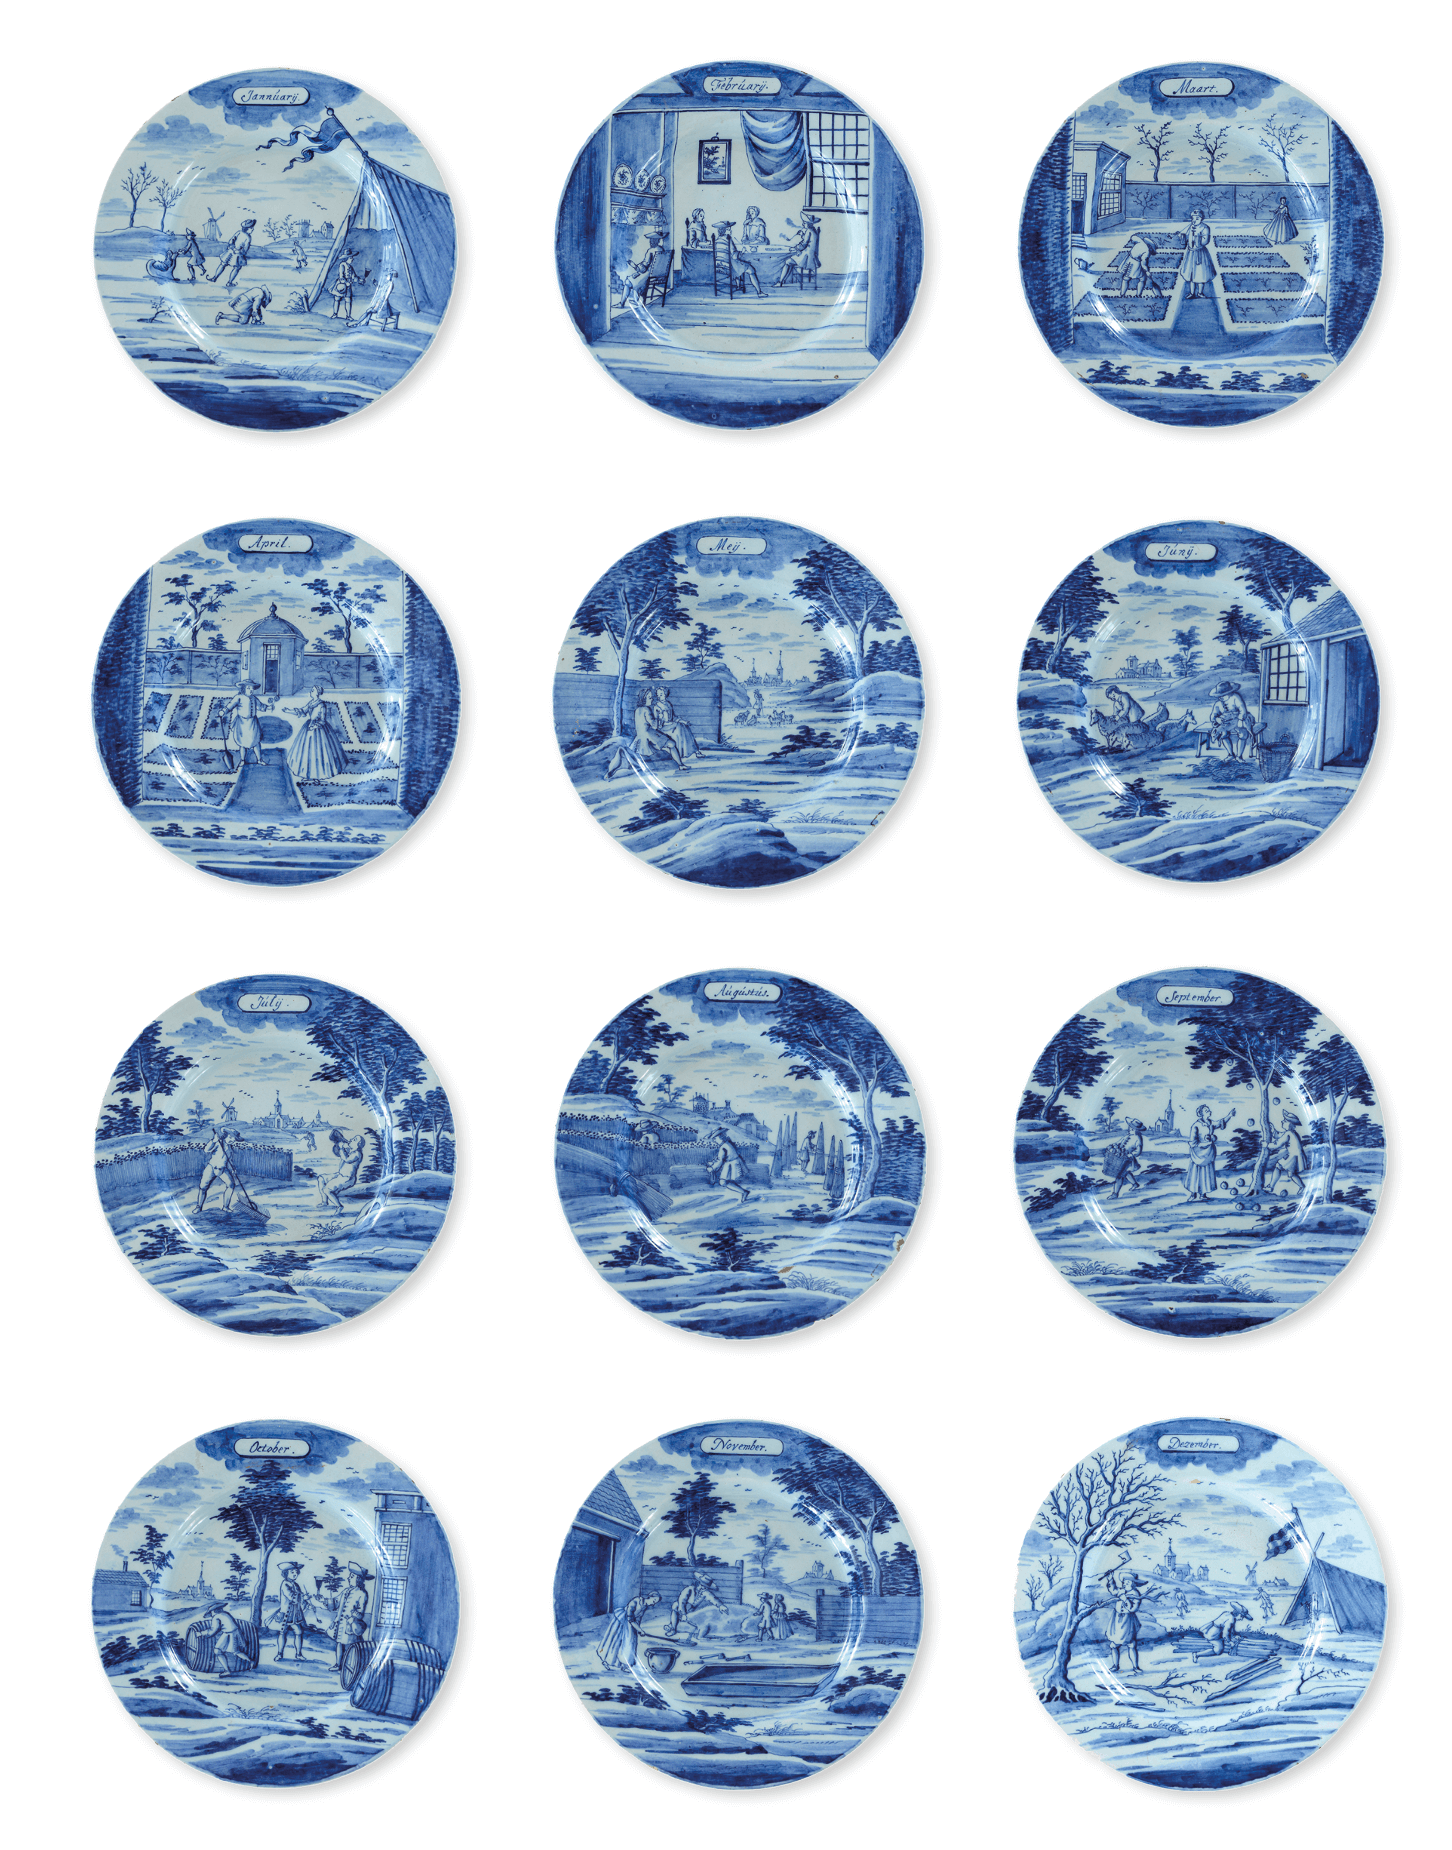 Blue and white Delftware months plates